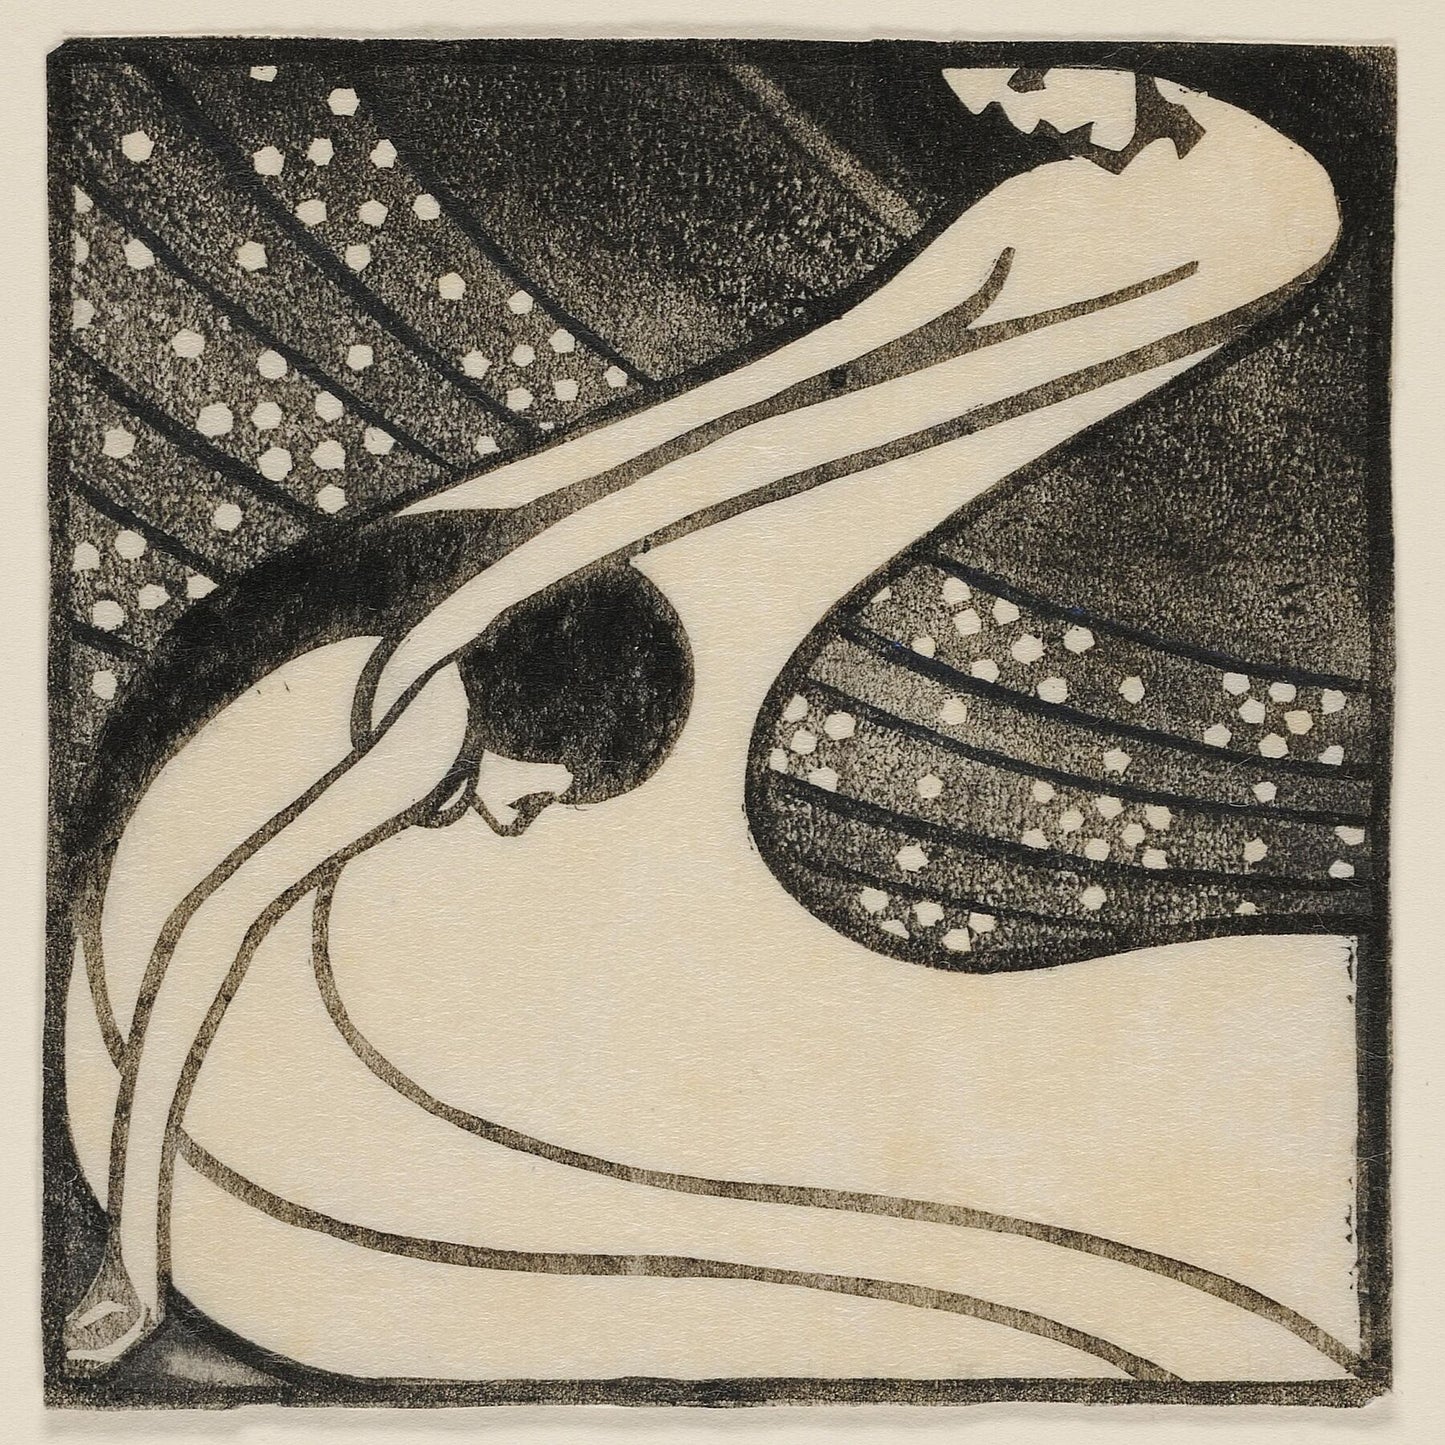 Two Intertwined Female Figures by Mileva Roller - c. 1908 -1915